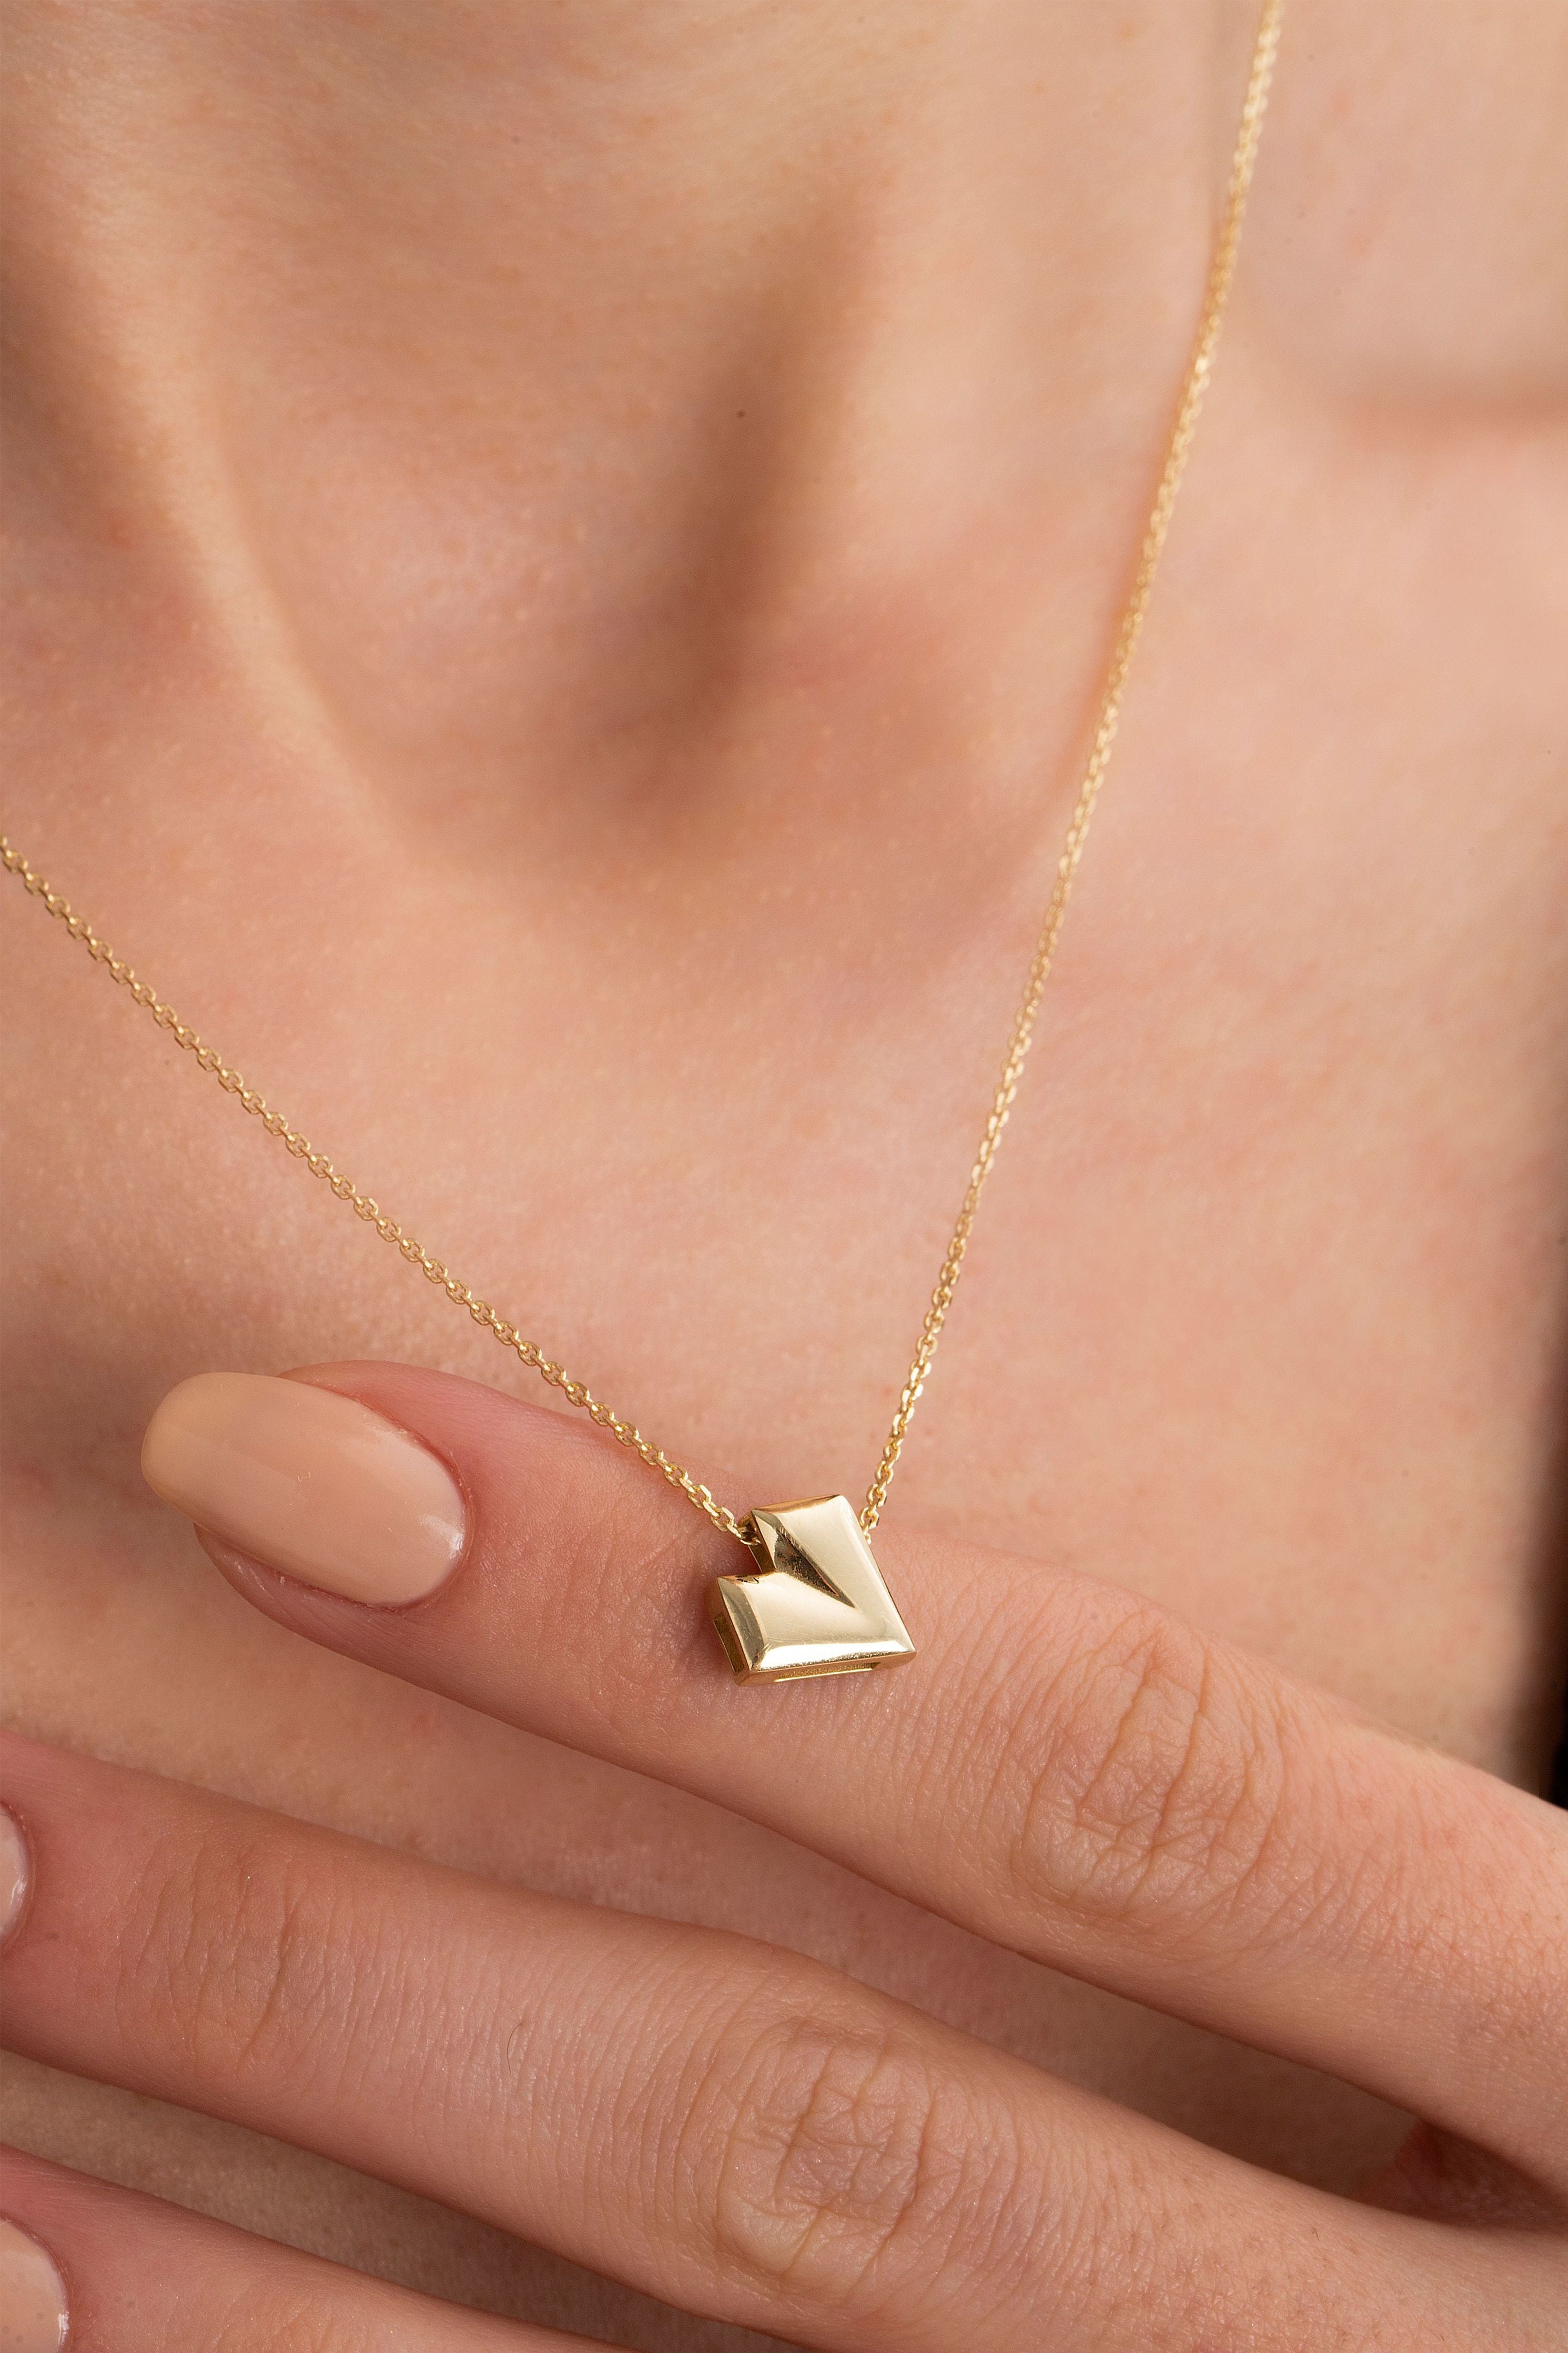 Origami Love Little Necklace in Yellow Gold - Her Story Shop